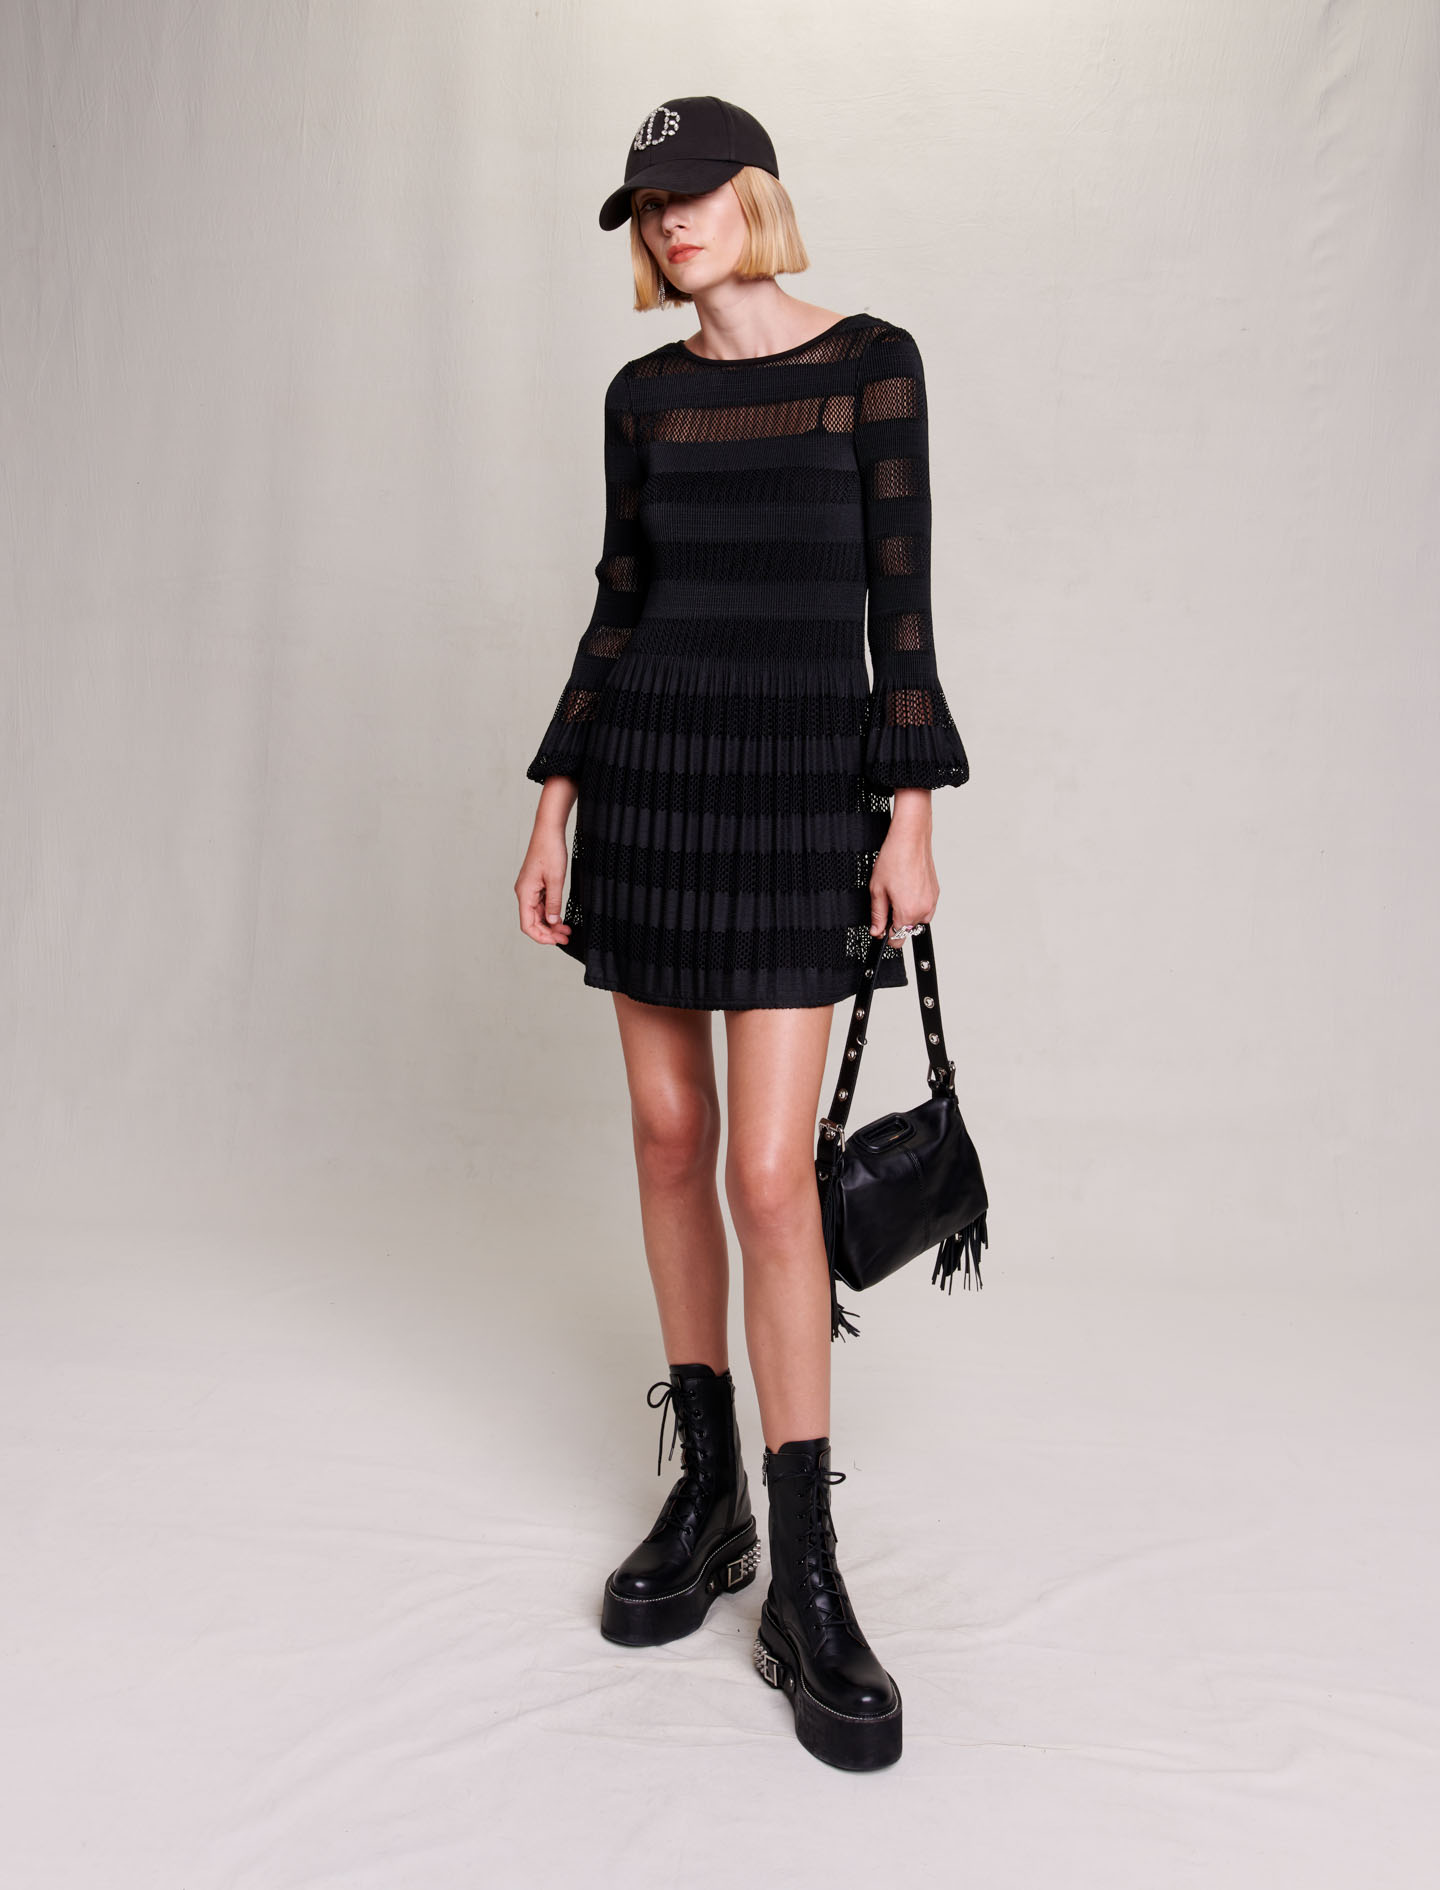 Maje Woman's polyester Slip: Short openwork knit dress for Fall/Winter, in color Black / Black